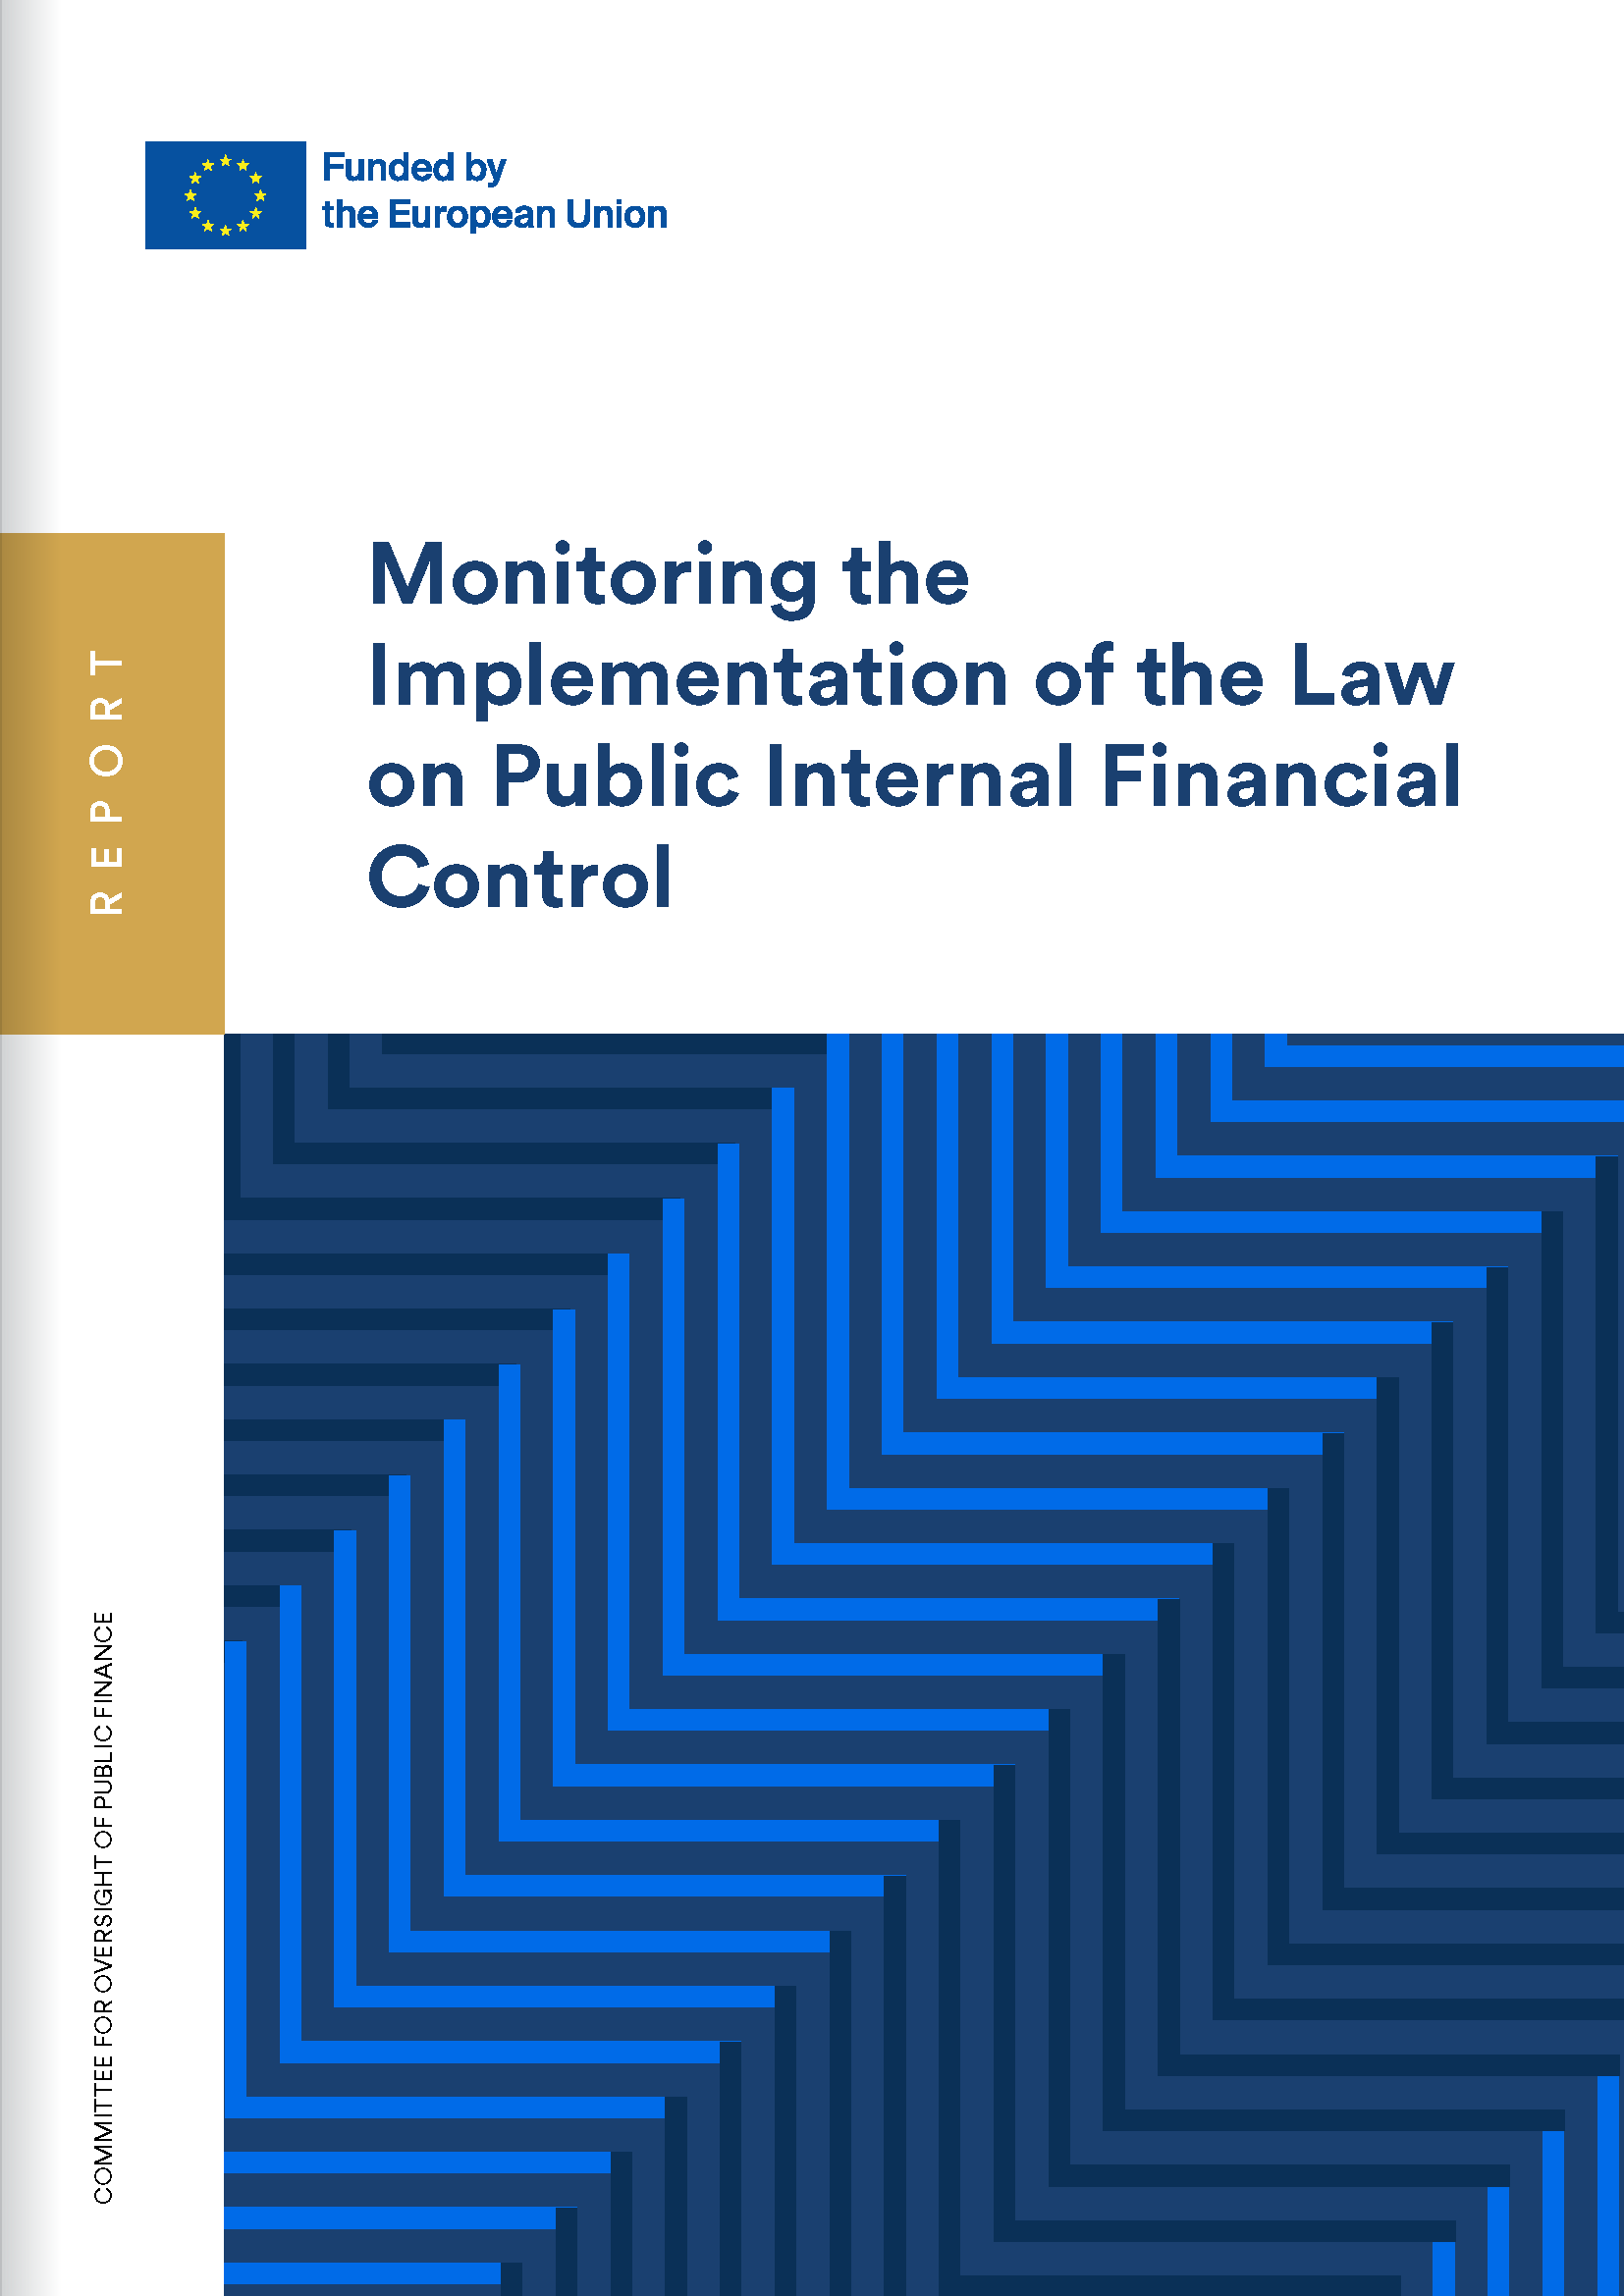 Monitoring the Implementation of the Law on Public Internal Financial Control